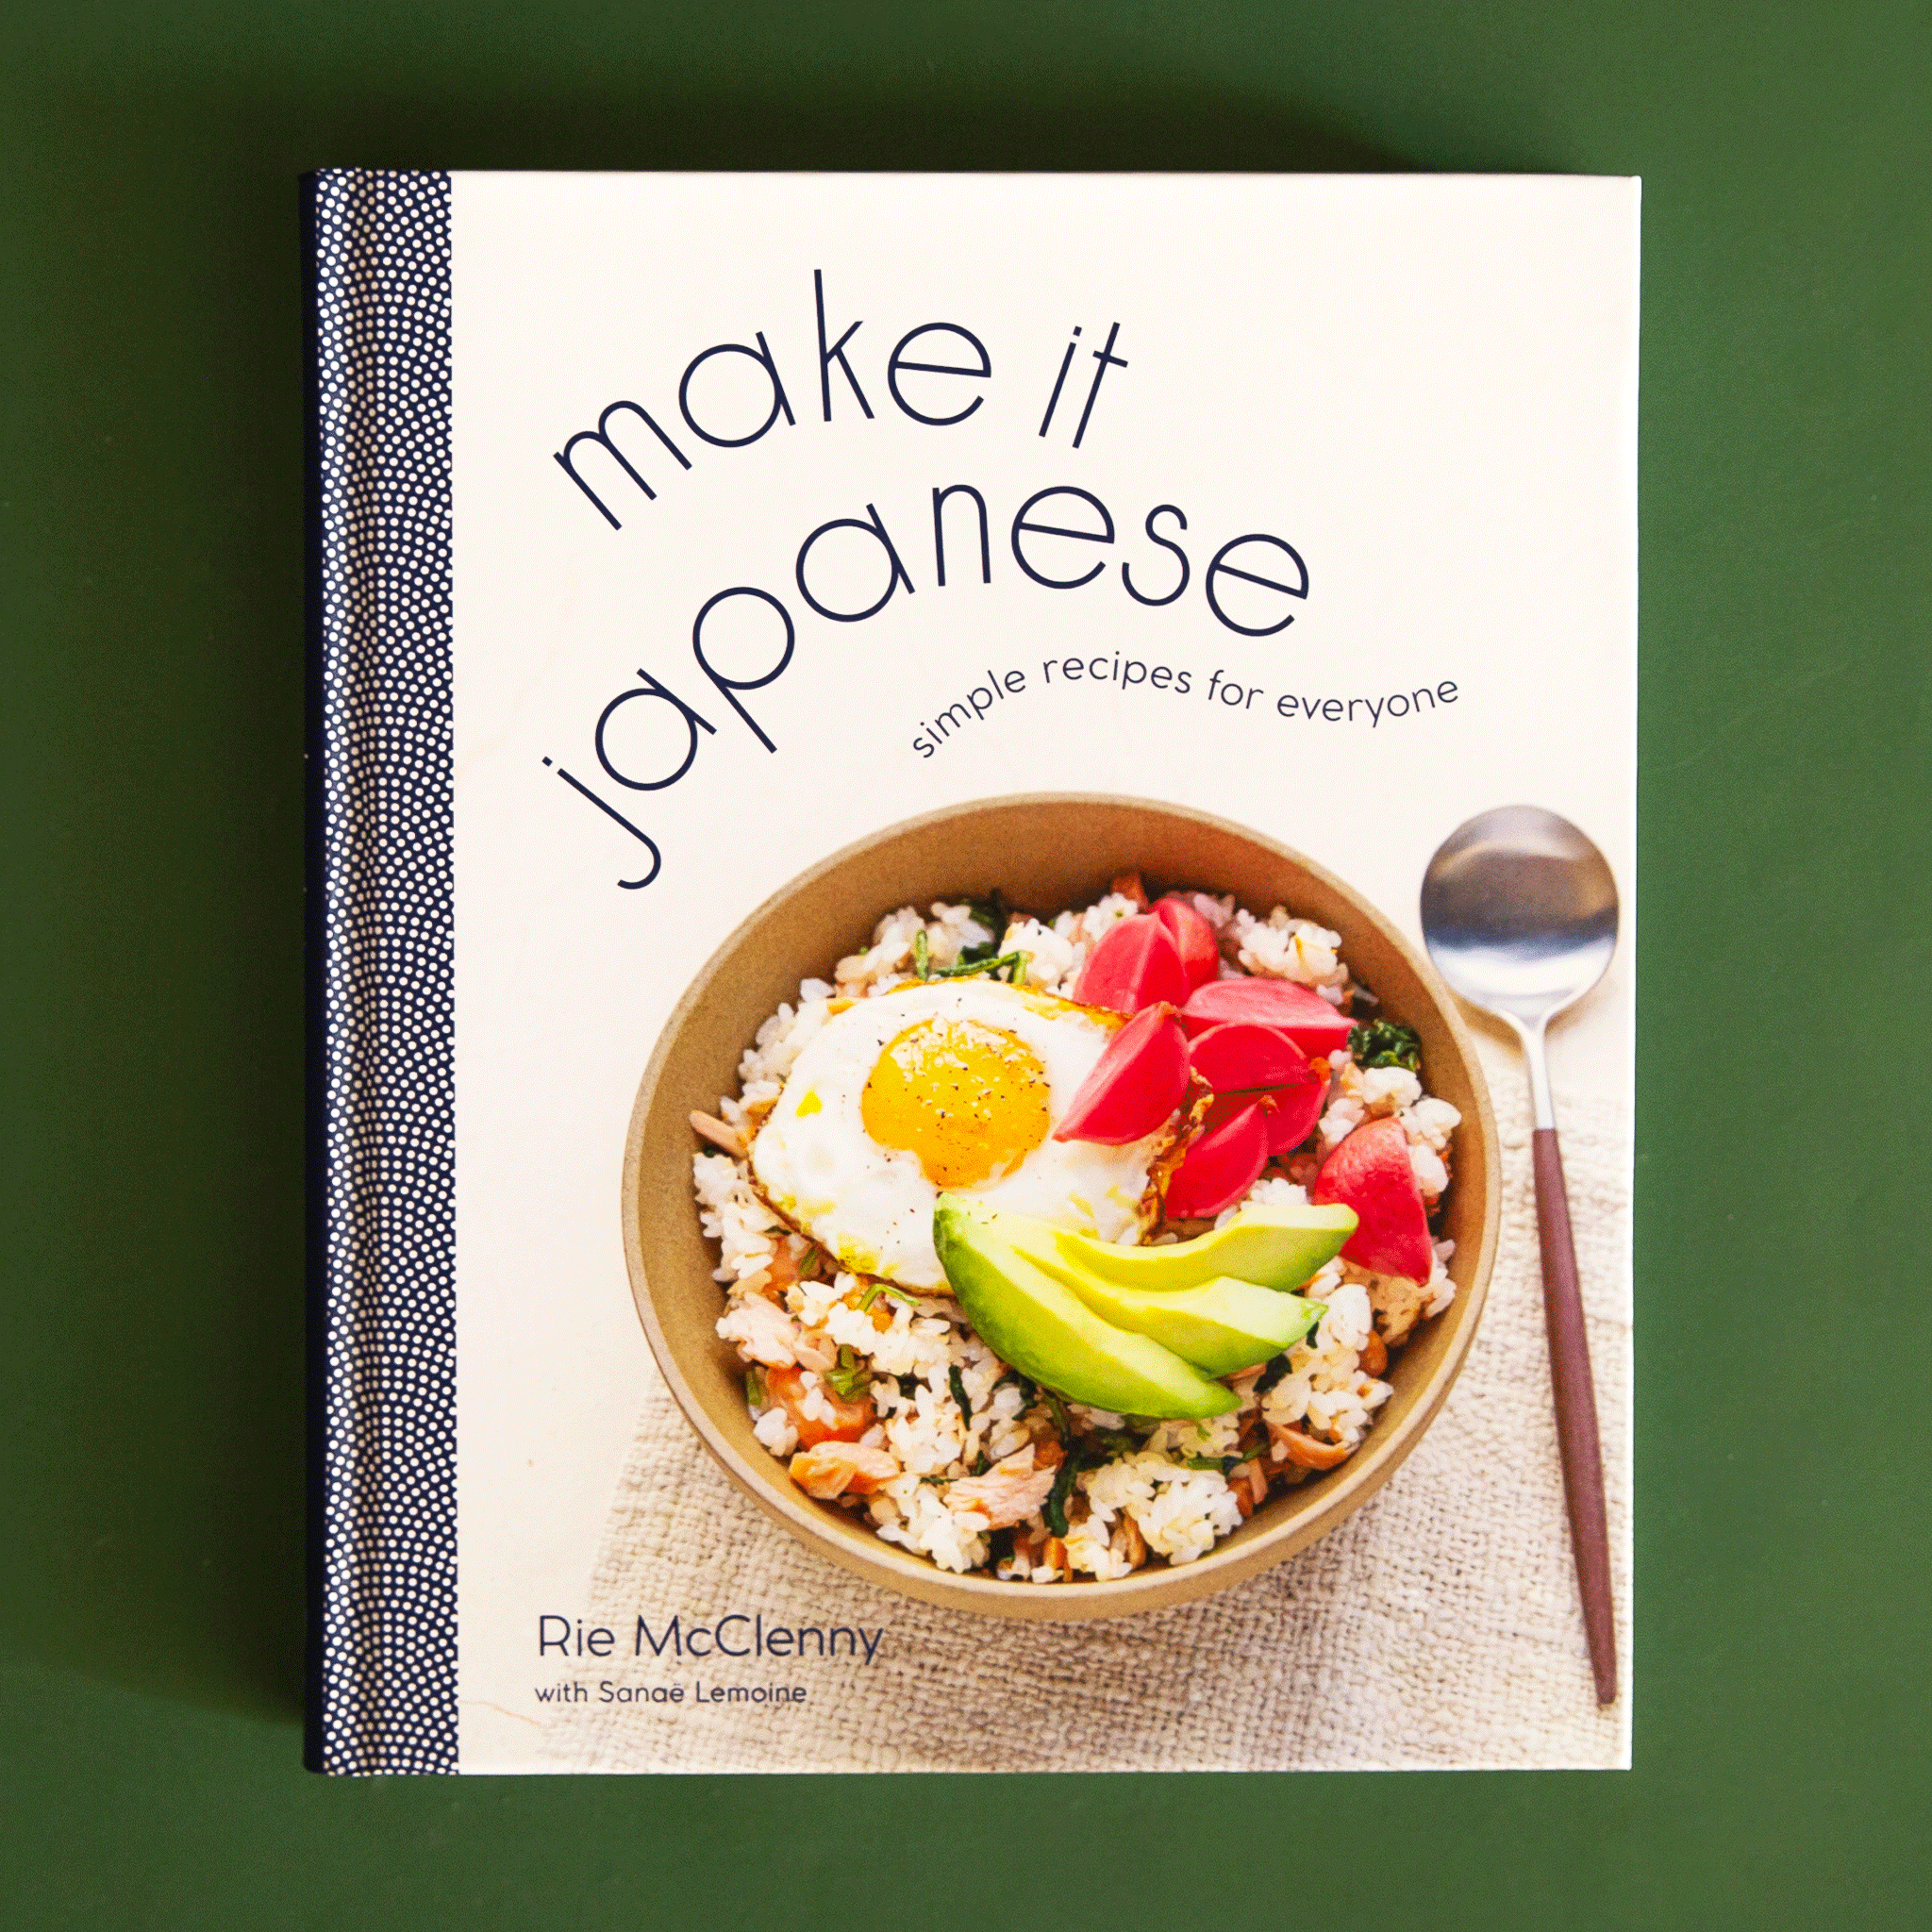 On a green background is an ivory book cover with a book of food and wavy text above it that reads, "make it japanese simple recipes for everyone".